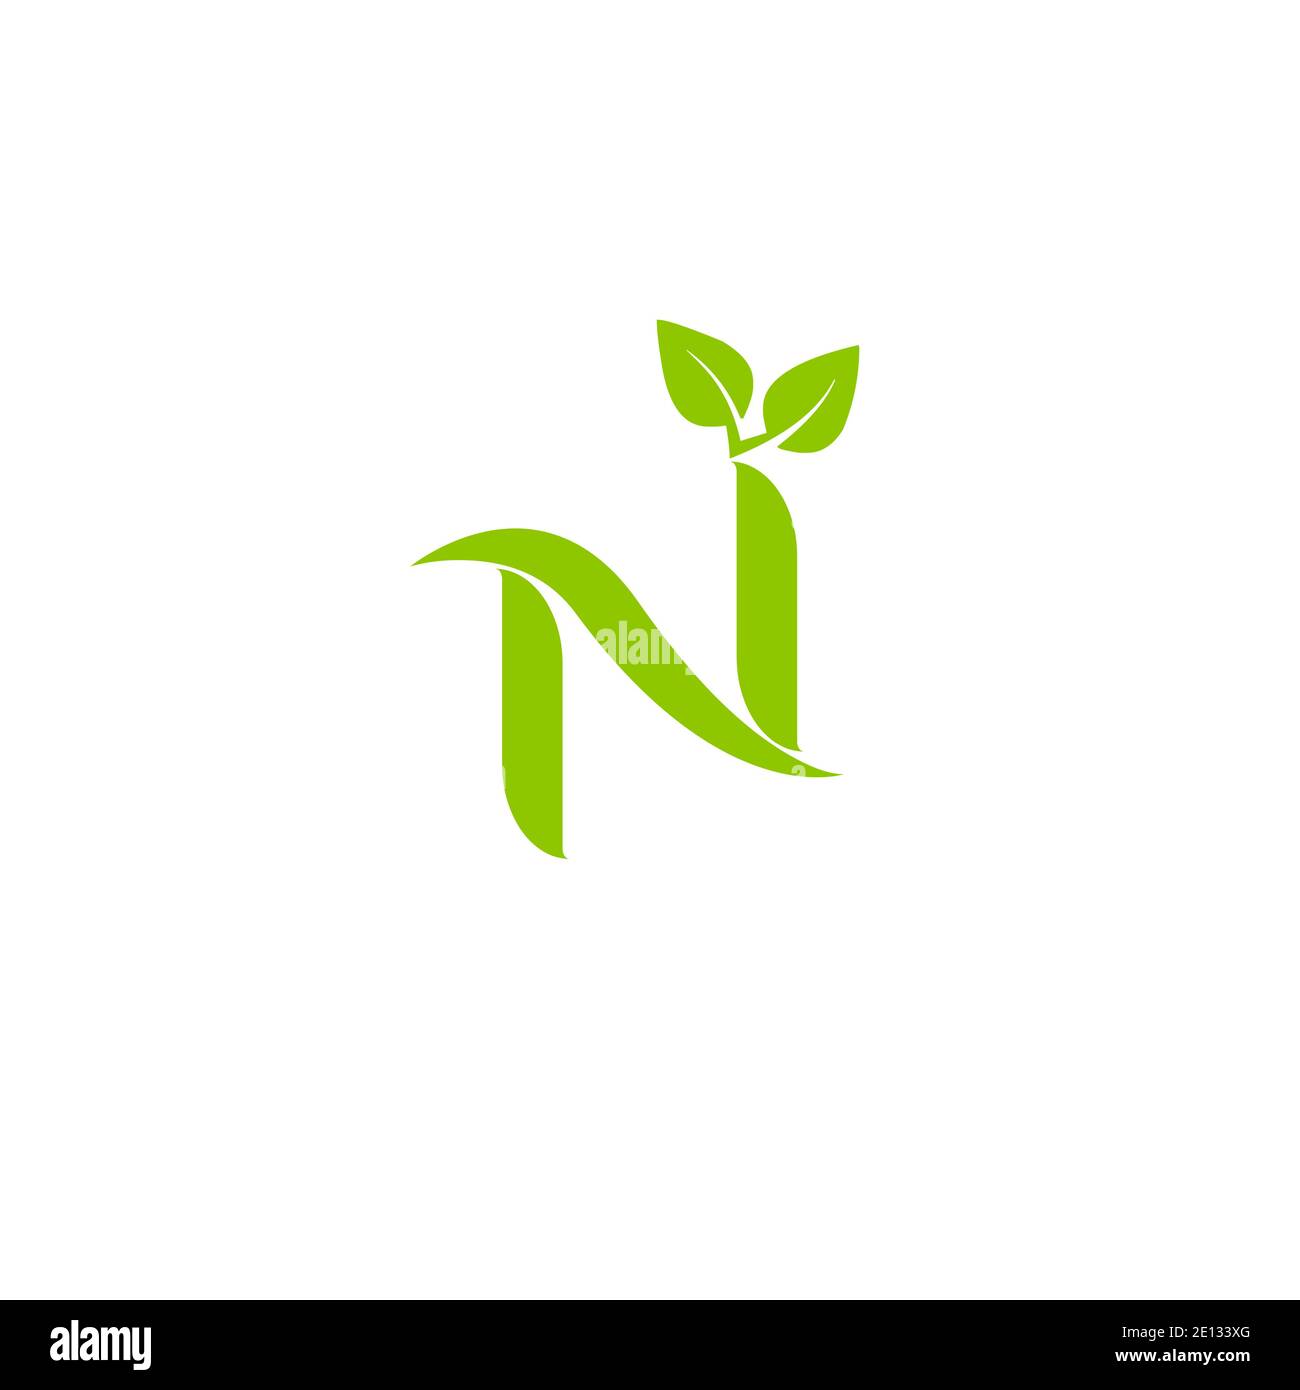 N nature logo design for nature and natural product. Stock Vector